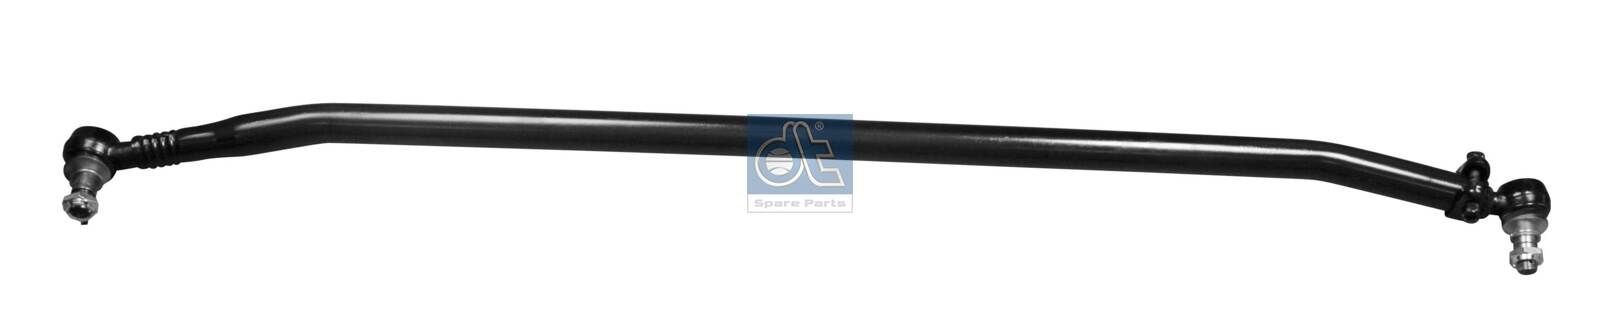 DT Spare Parts 6.53004 Rod Assembly 5010566063